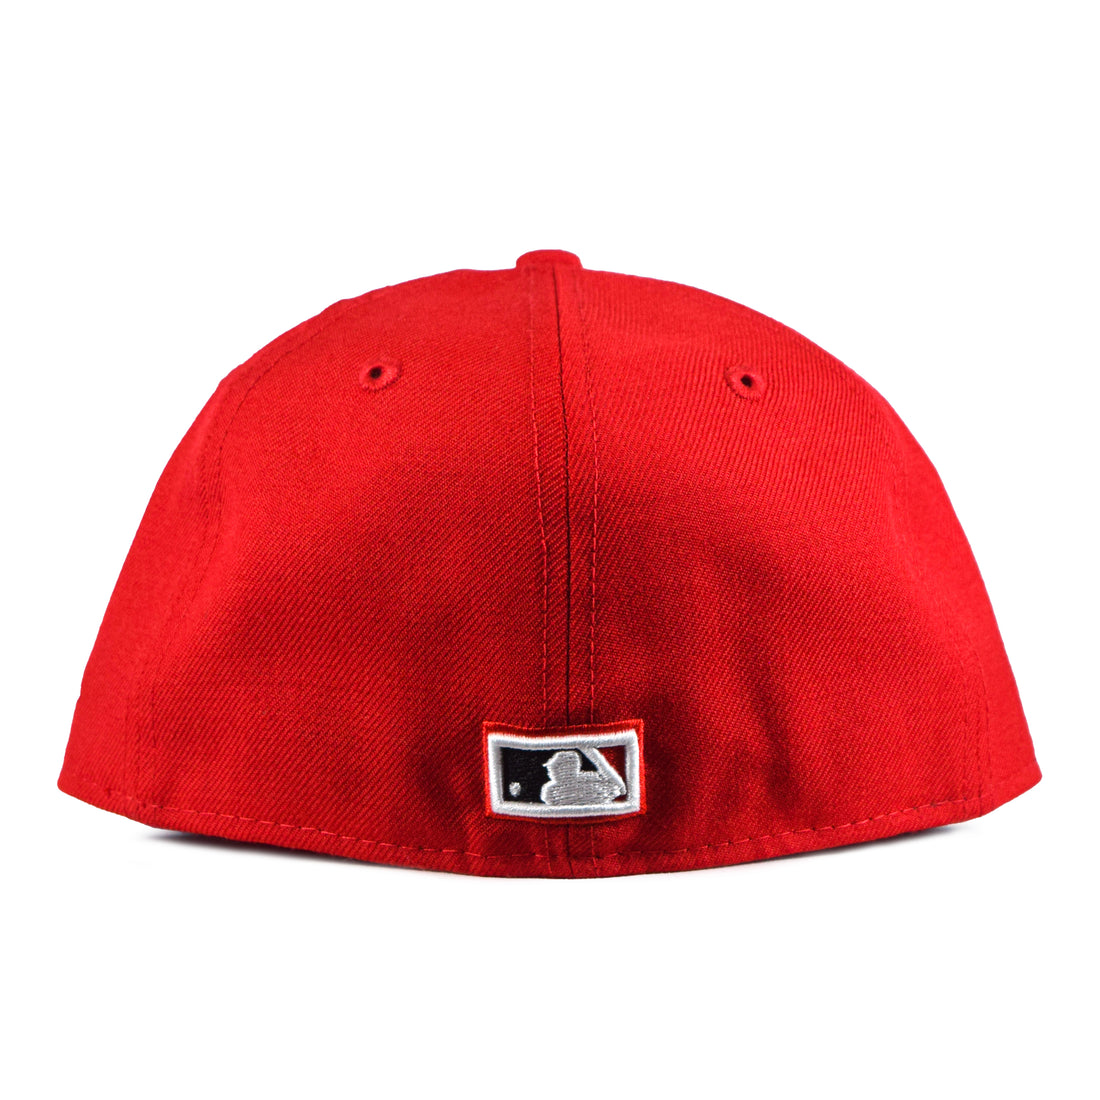 New Era Cincinnati Reds 59Fifty Fitted - Red/Old English